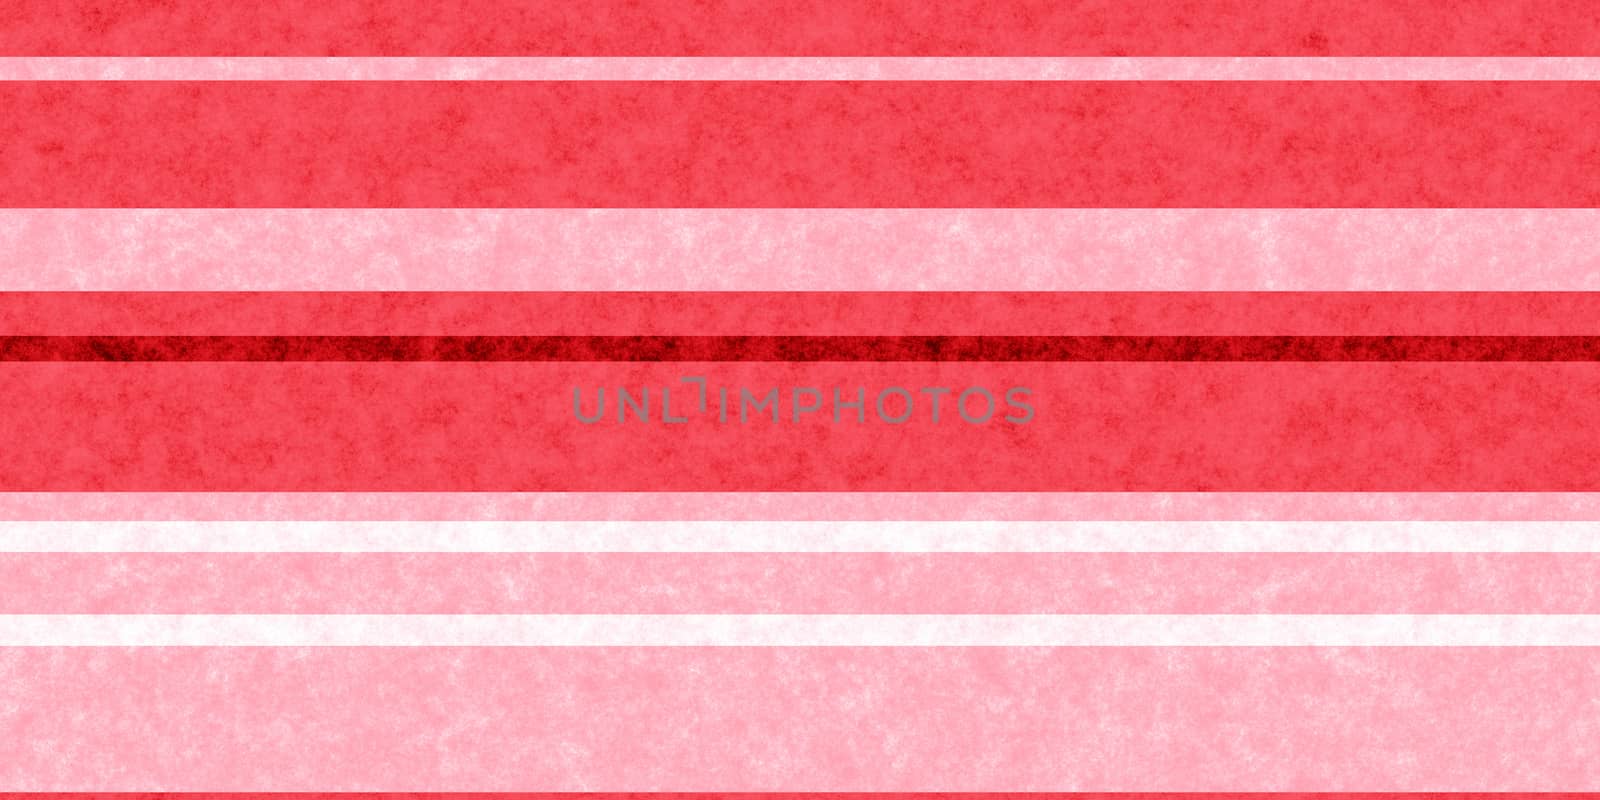 Red Seamless Grunge Stripe Paper Texture. Retro Vintage Scrapbook Lines Background. Horizontal Along Direction.